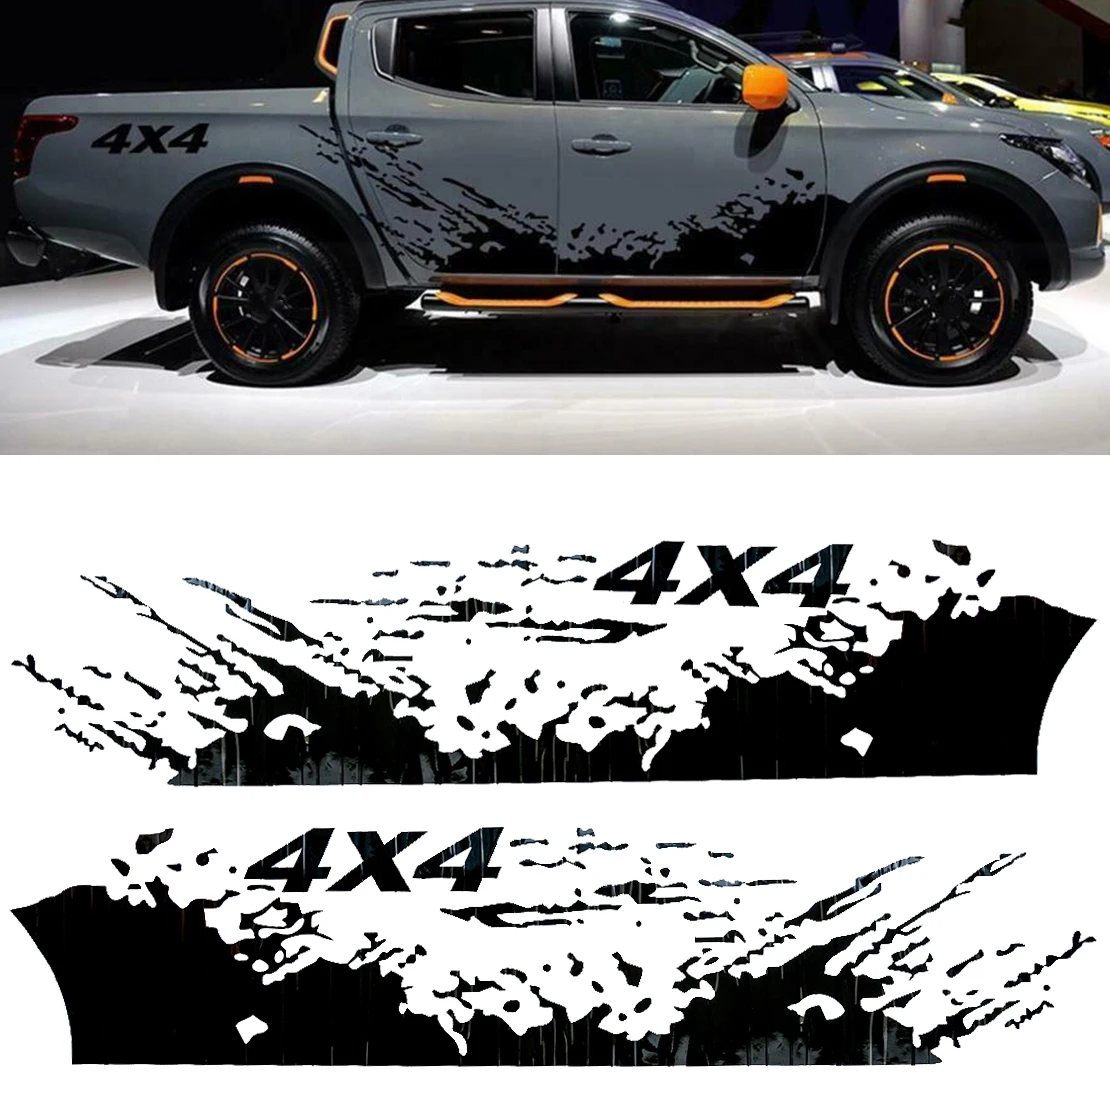 

1 Pair Black Vinyl Car Exterior Left&Right Side Body Splash Graphic Decal Stickers Fit for 4X4 Truck Off Road Pickup